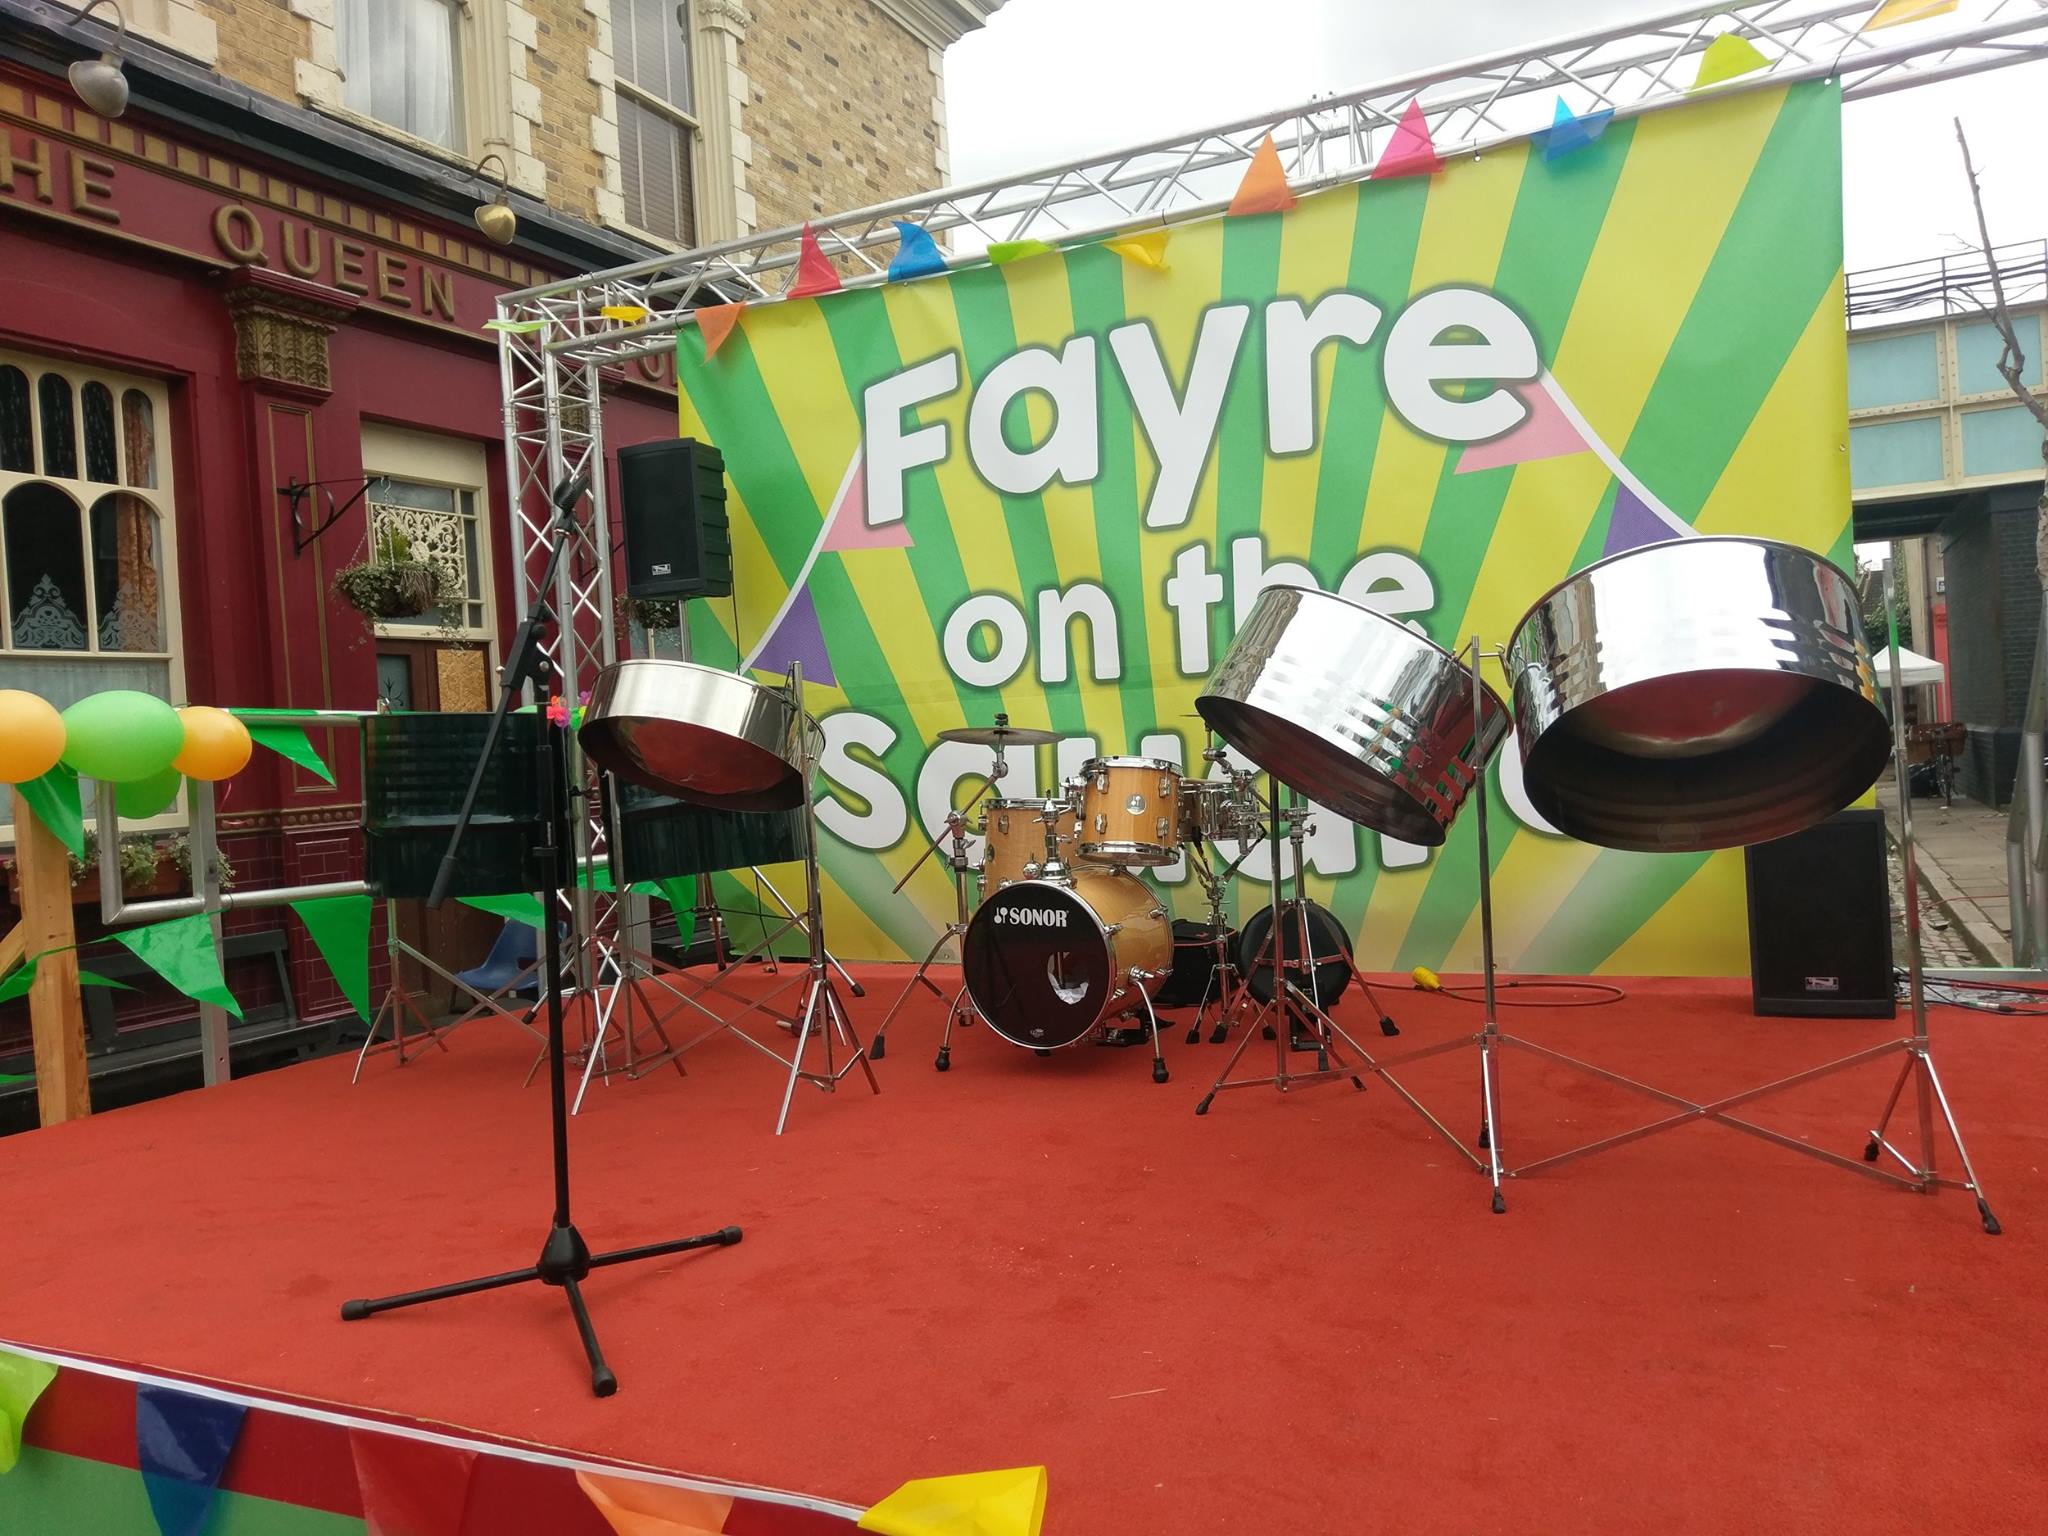 Five-piece Caribbean steel drum band performing at a vibrant party on the set of the TV show EastEnders, bringing lively music and festive atmosphere.